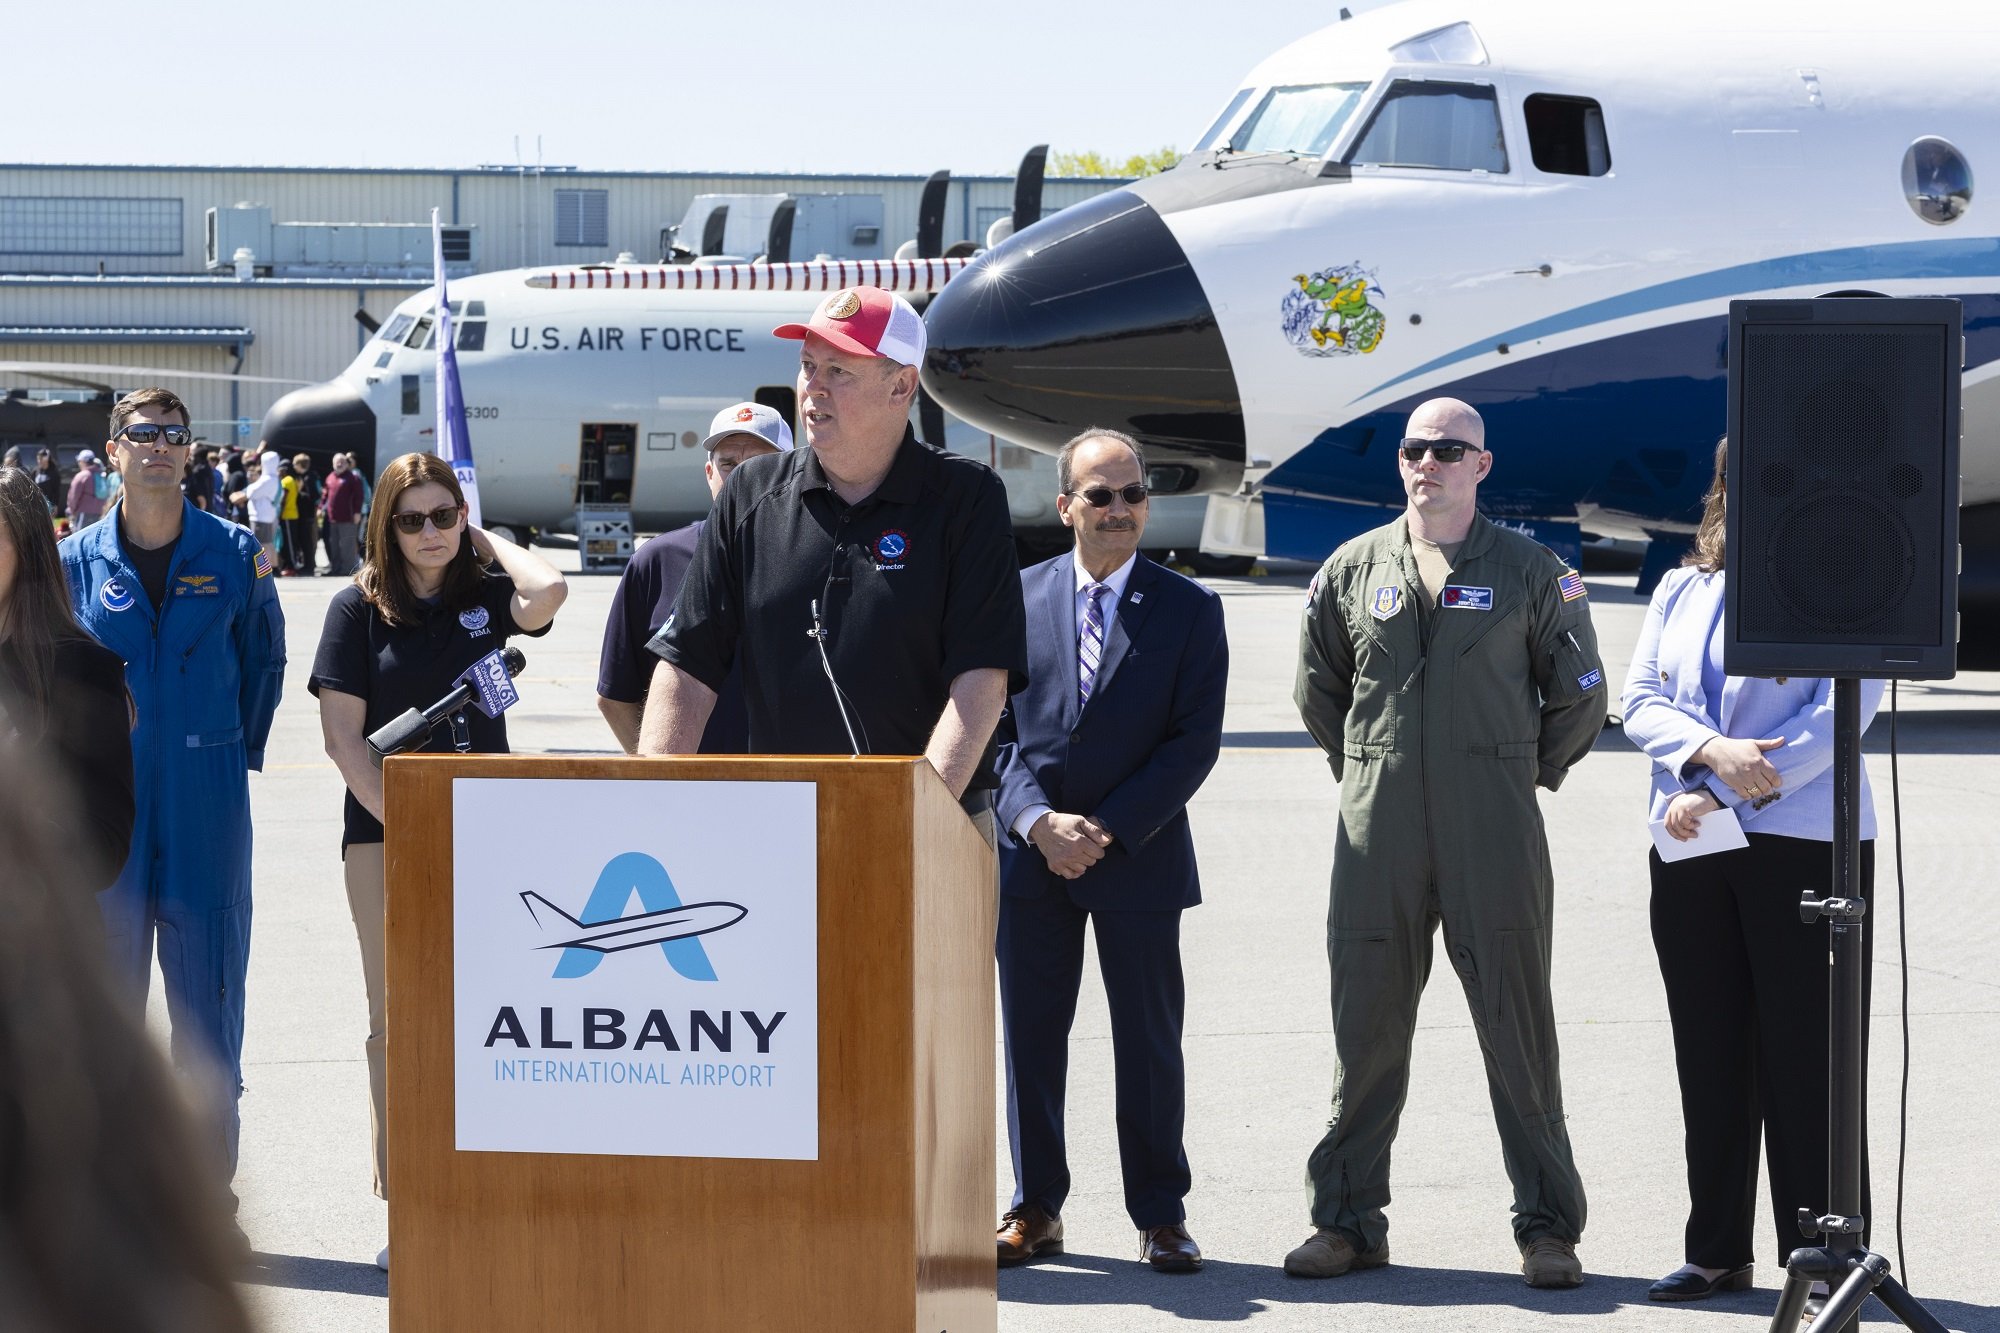 Weather and emergency management officials host a press conference at the Albany International Airport.